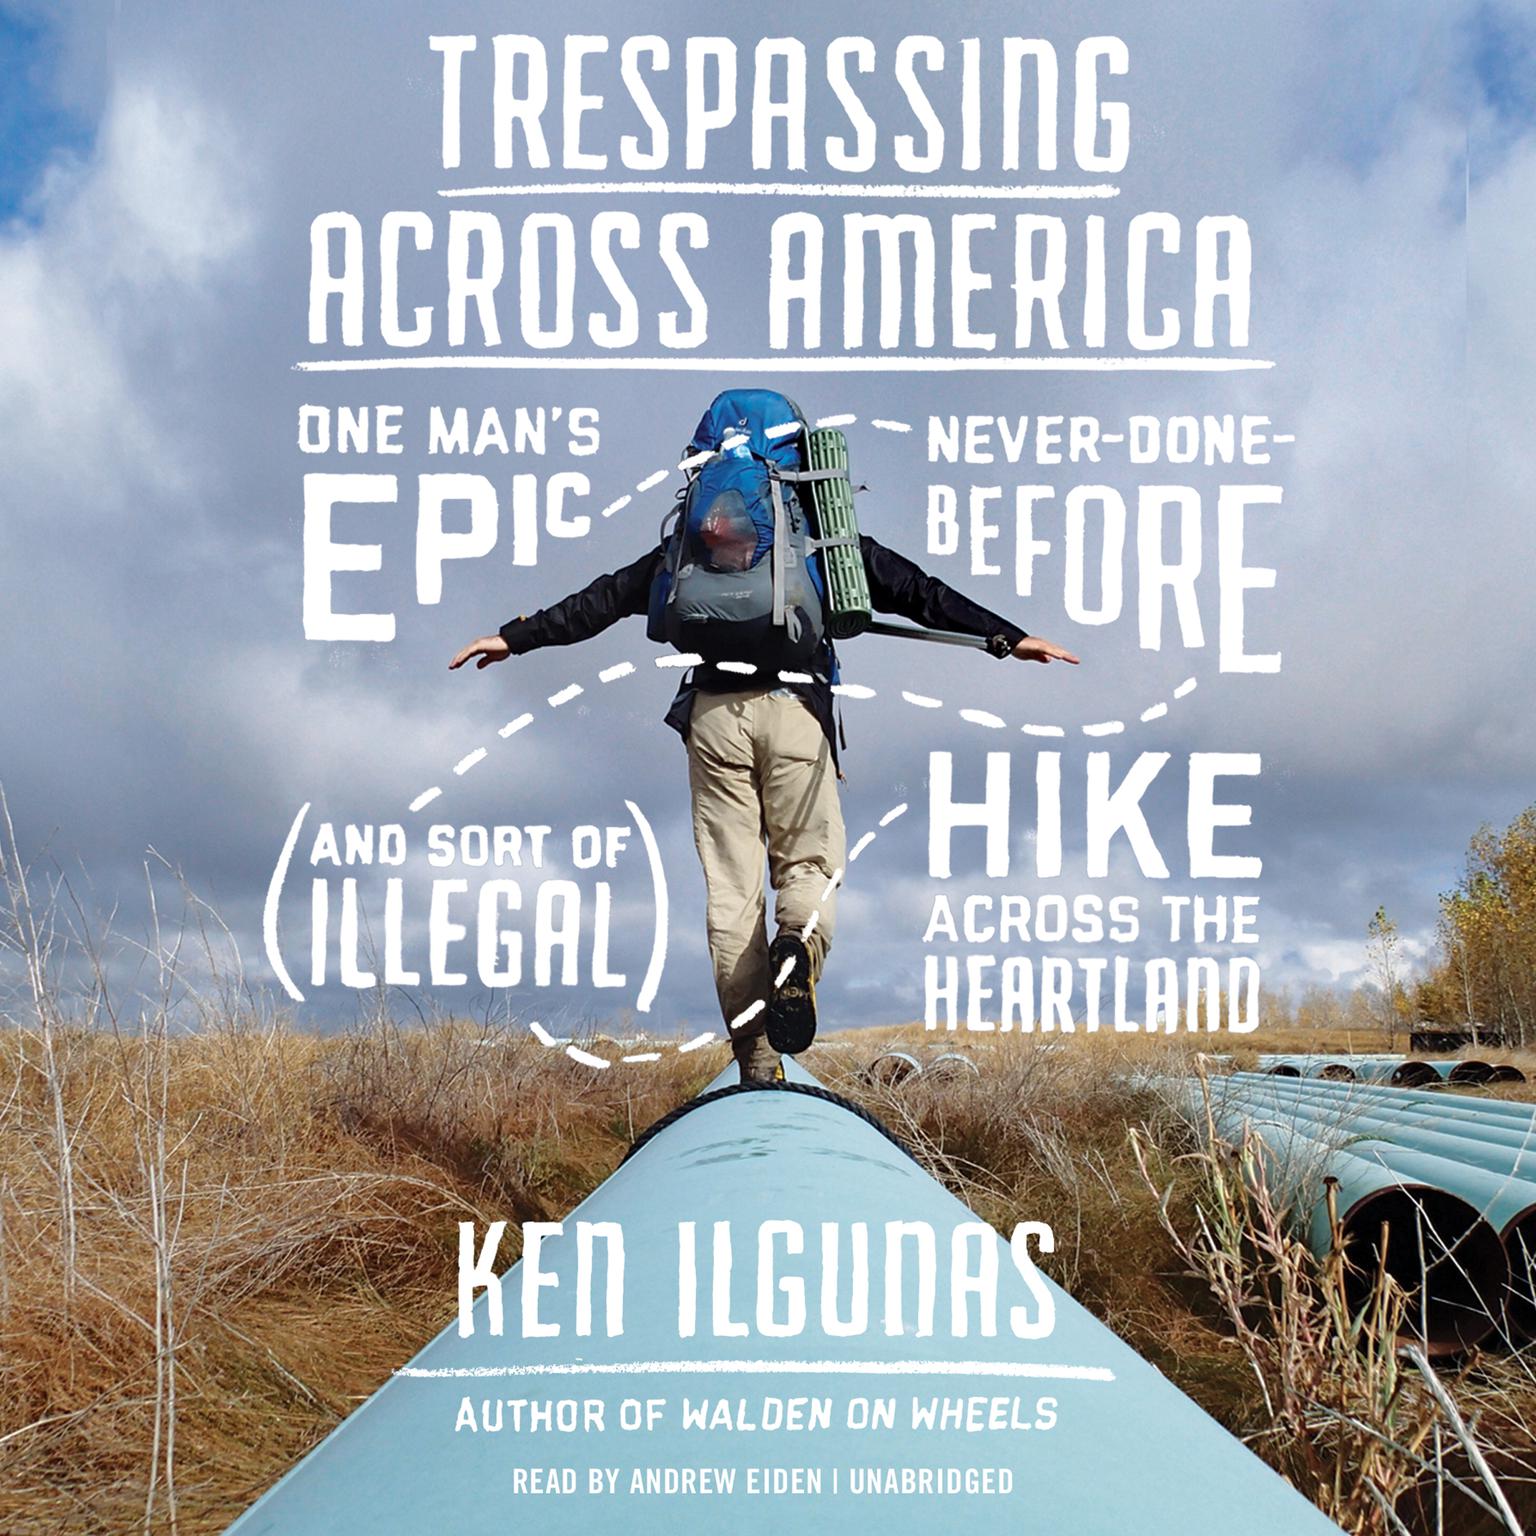 Trespassing across America: One Man’s Epic, Never-Done-Before (and Sort of Illegal) Hike across the Heartland Audiobook, by Ken Ilgunas